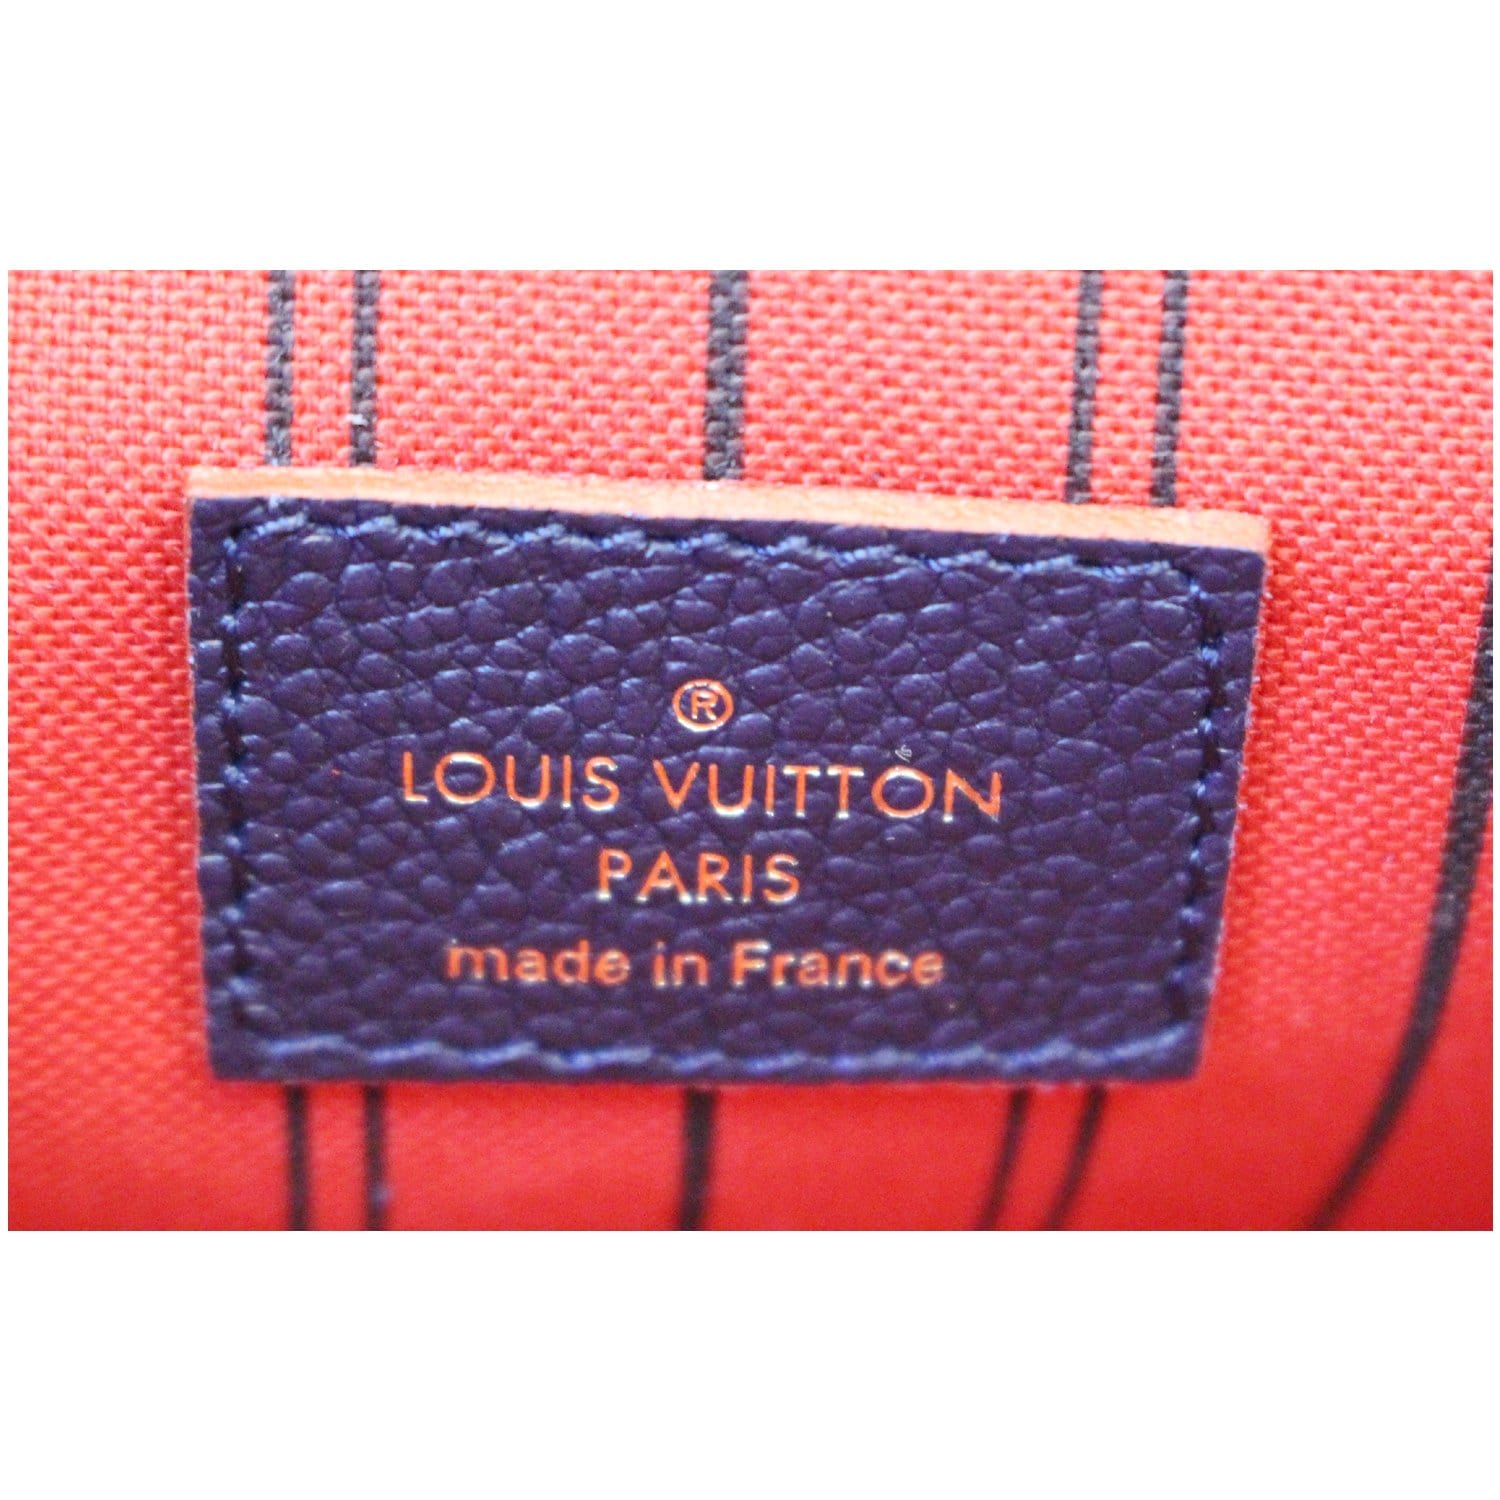 UhfmrShops, Louis Vuitton Metis shoulder bag in navy blue empreinte  monogram leather and red piping